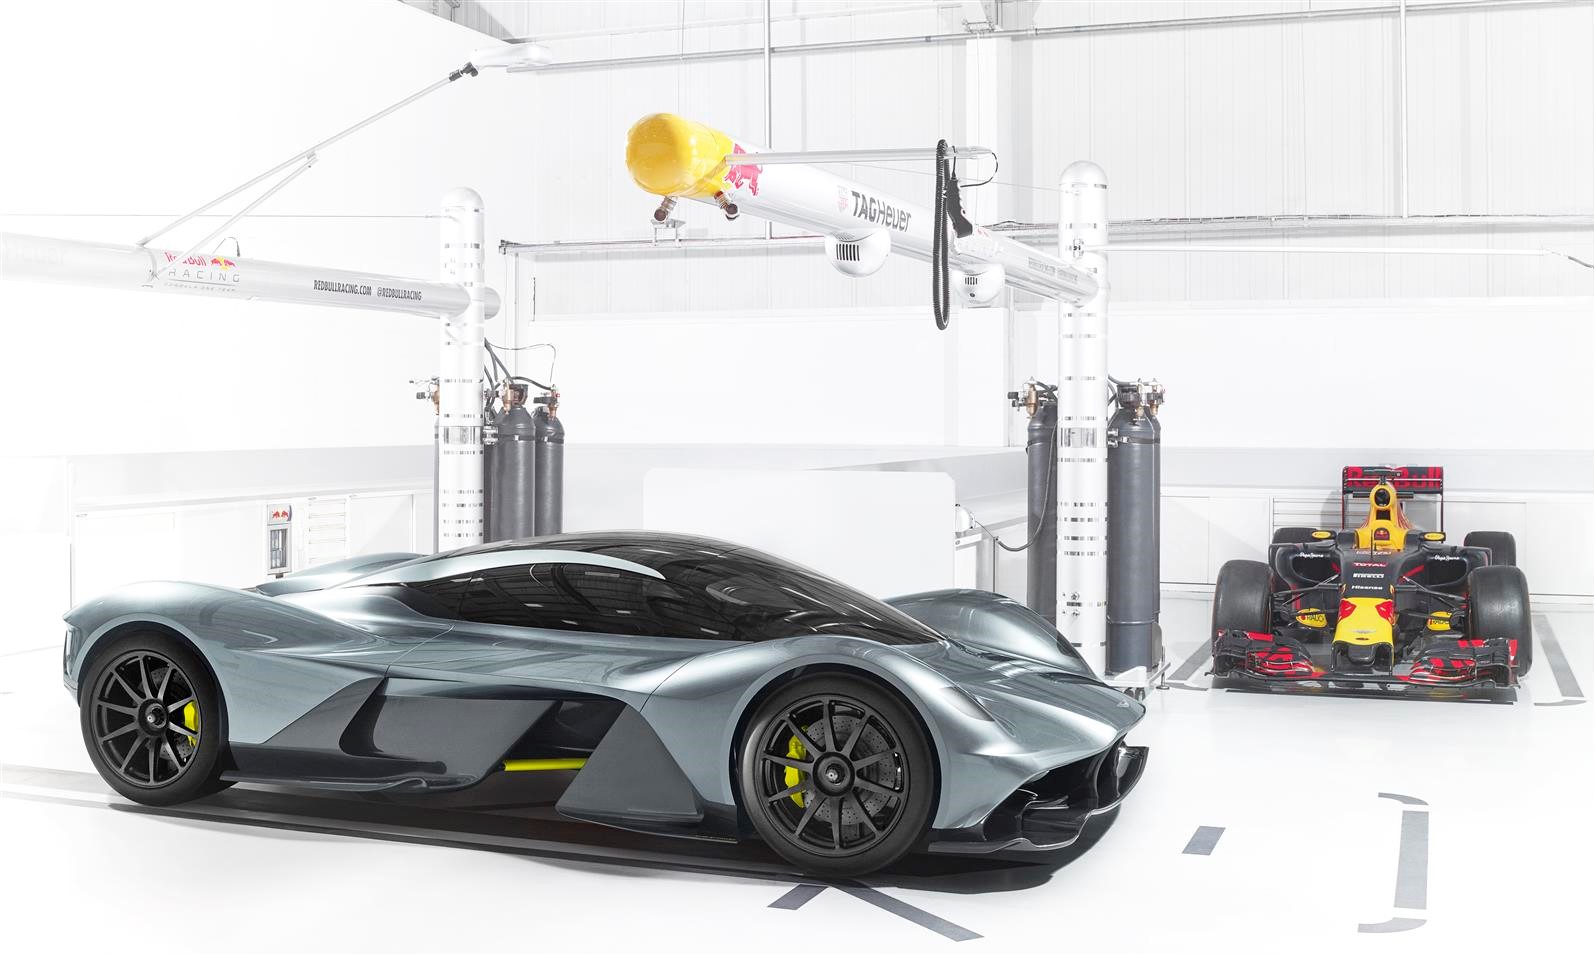 You can’t handle the AM-RB 001